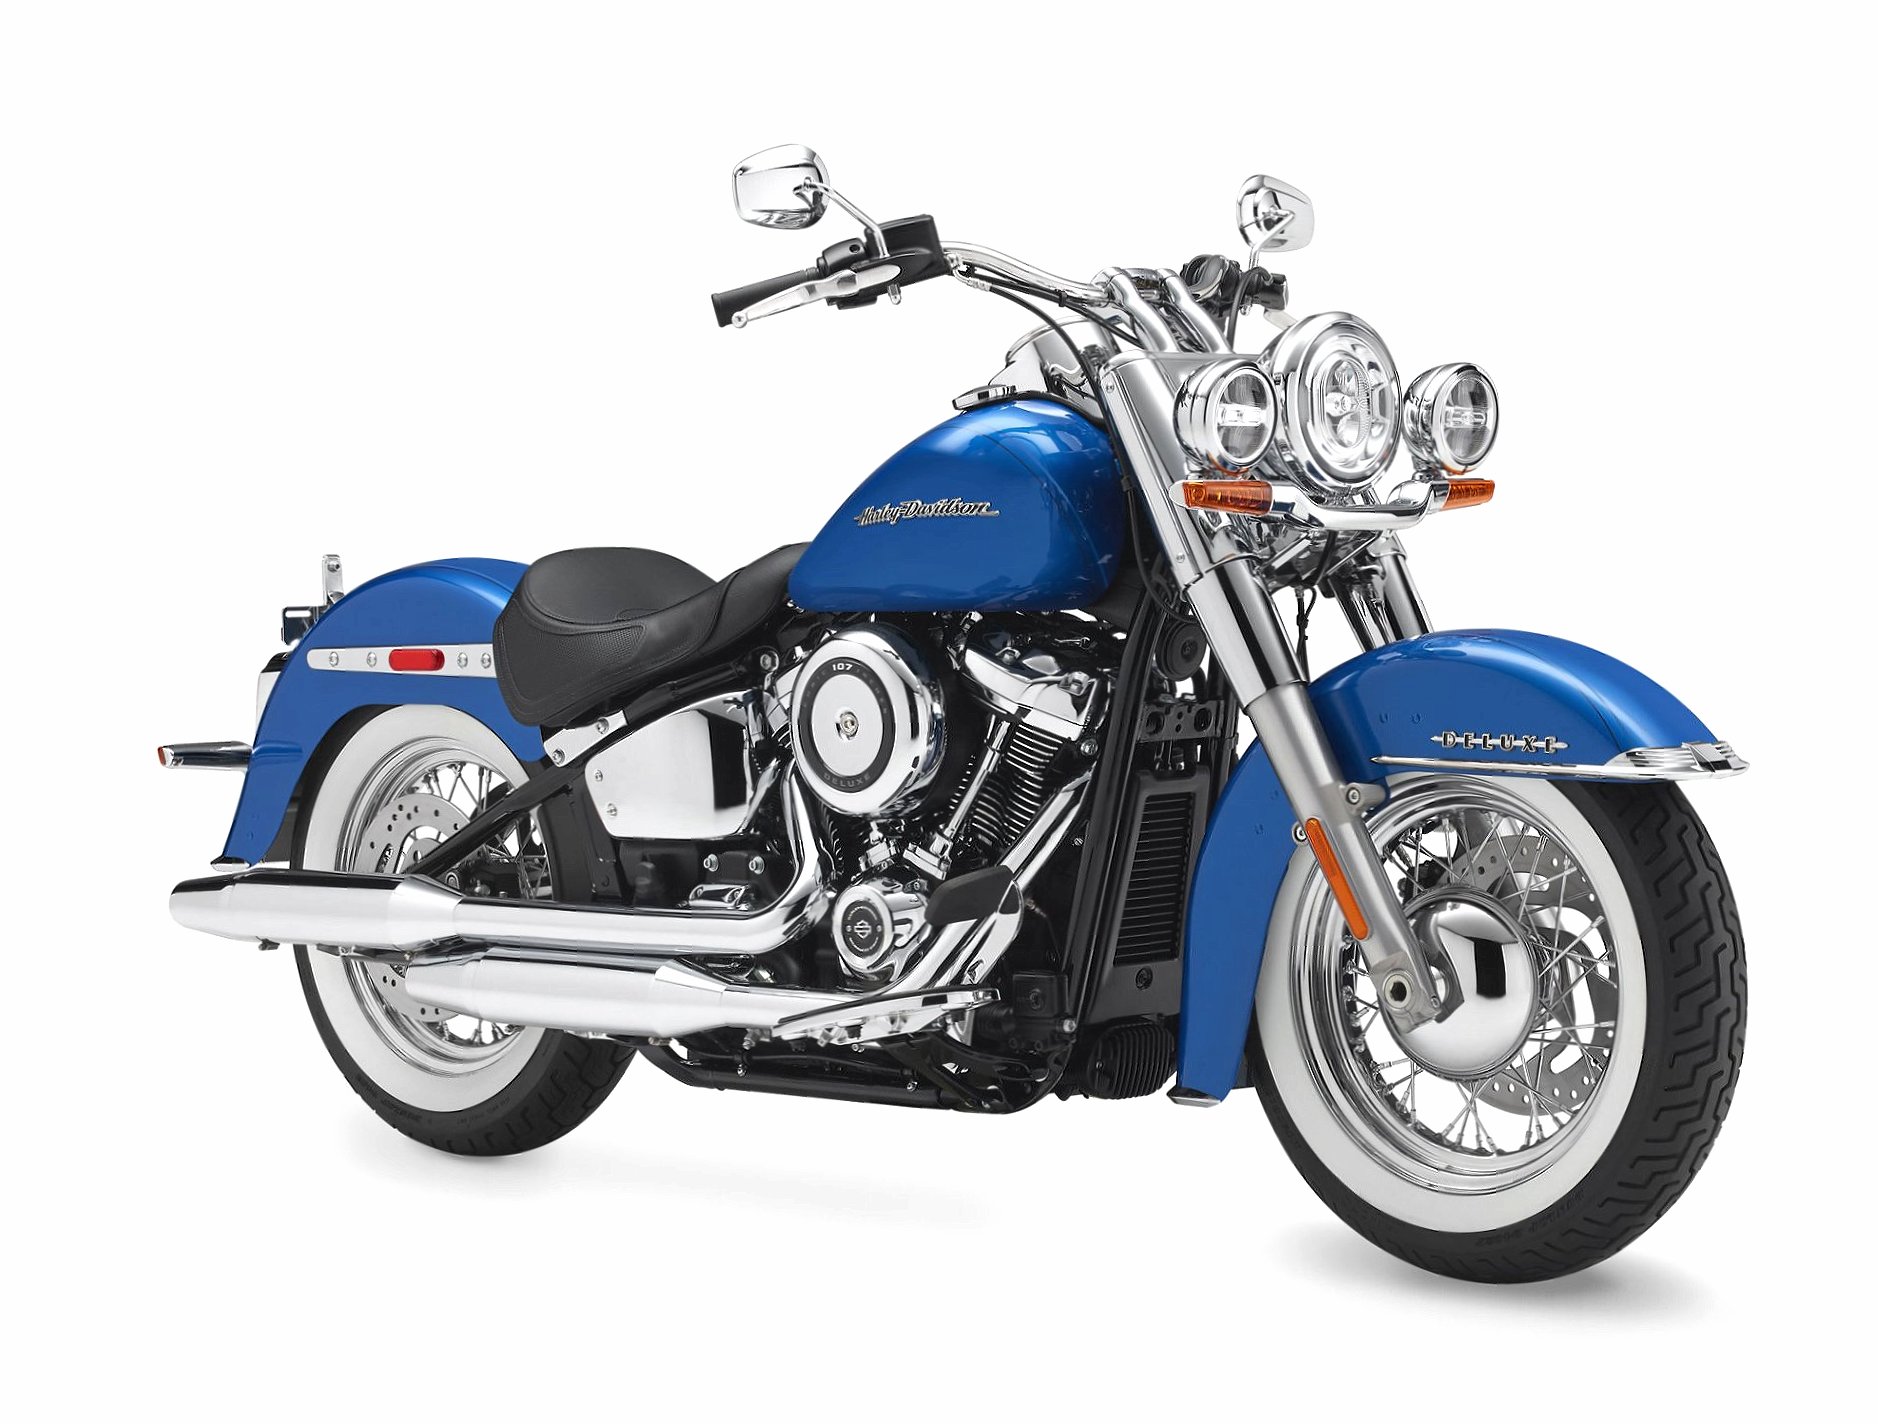 Harley-Davidson Softail Deluxe wallpapers HD quality